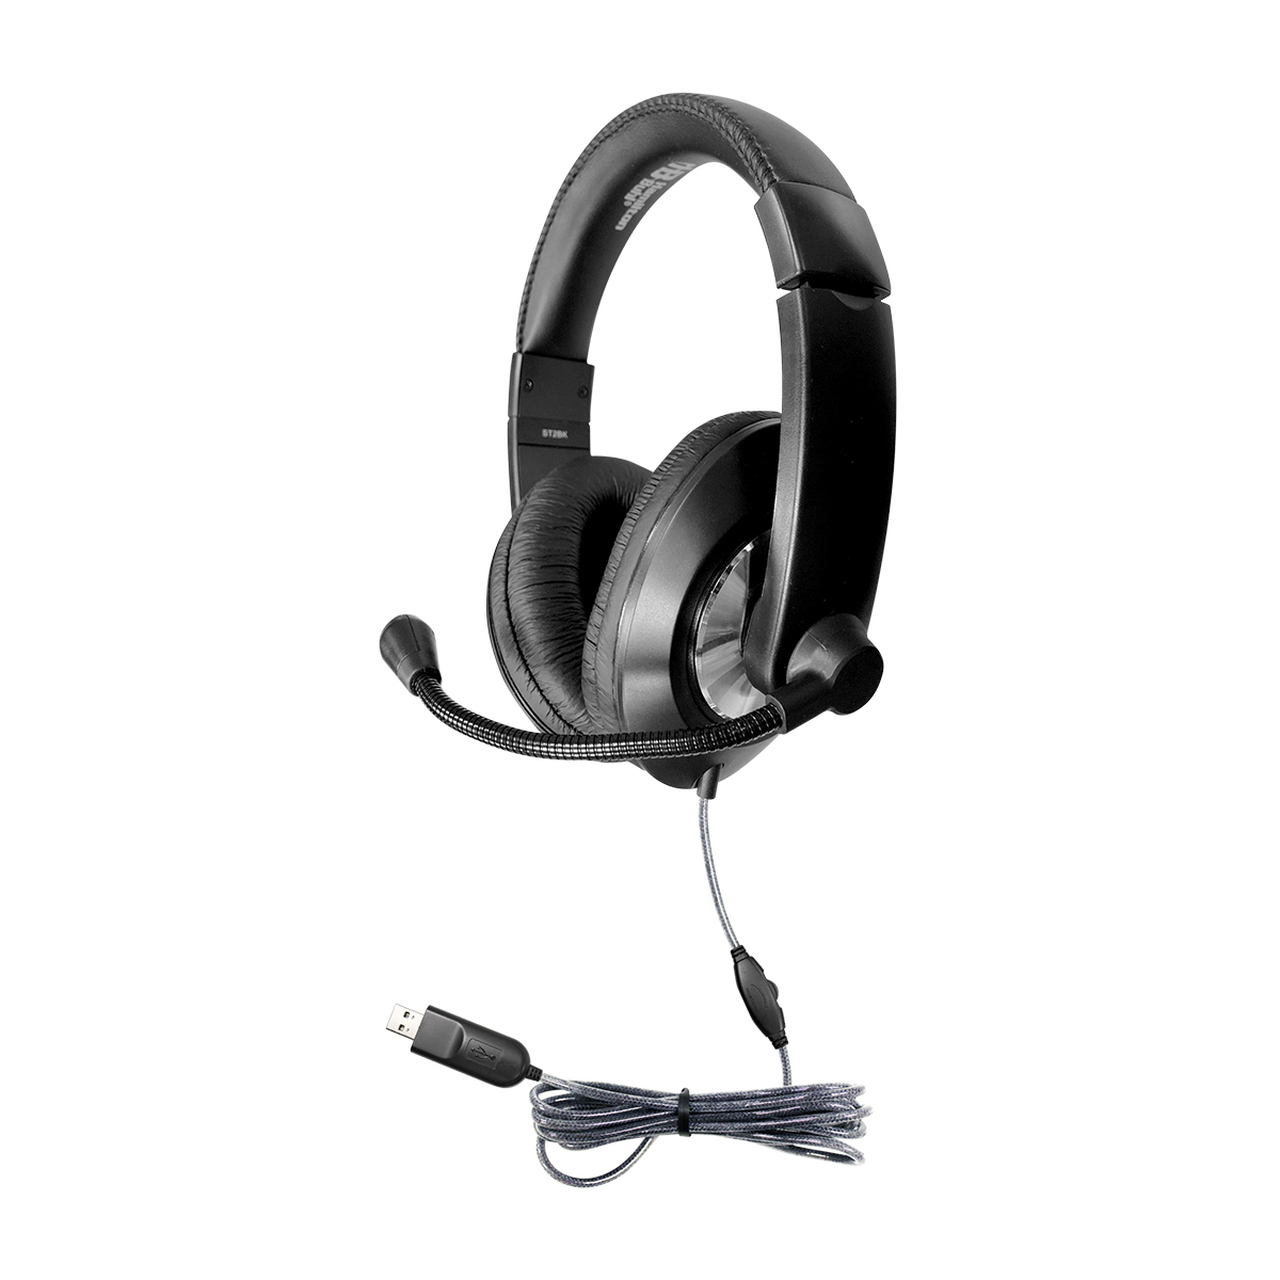 Hamilton Buhl Smart-Trek Deluxe Stereo Headset with In-Line Volume Control and USB Plug